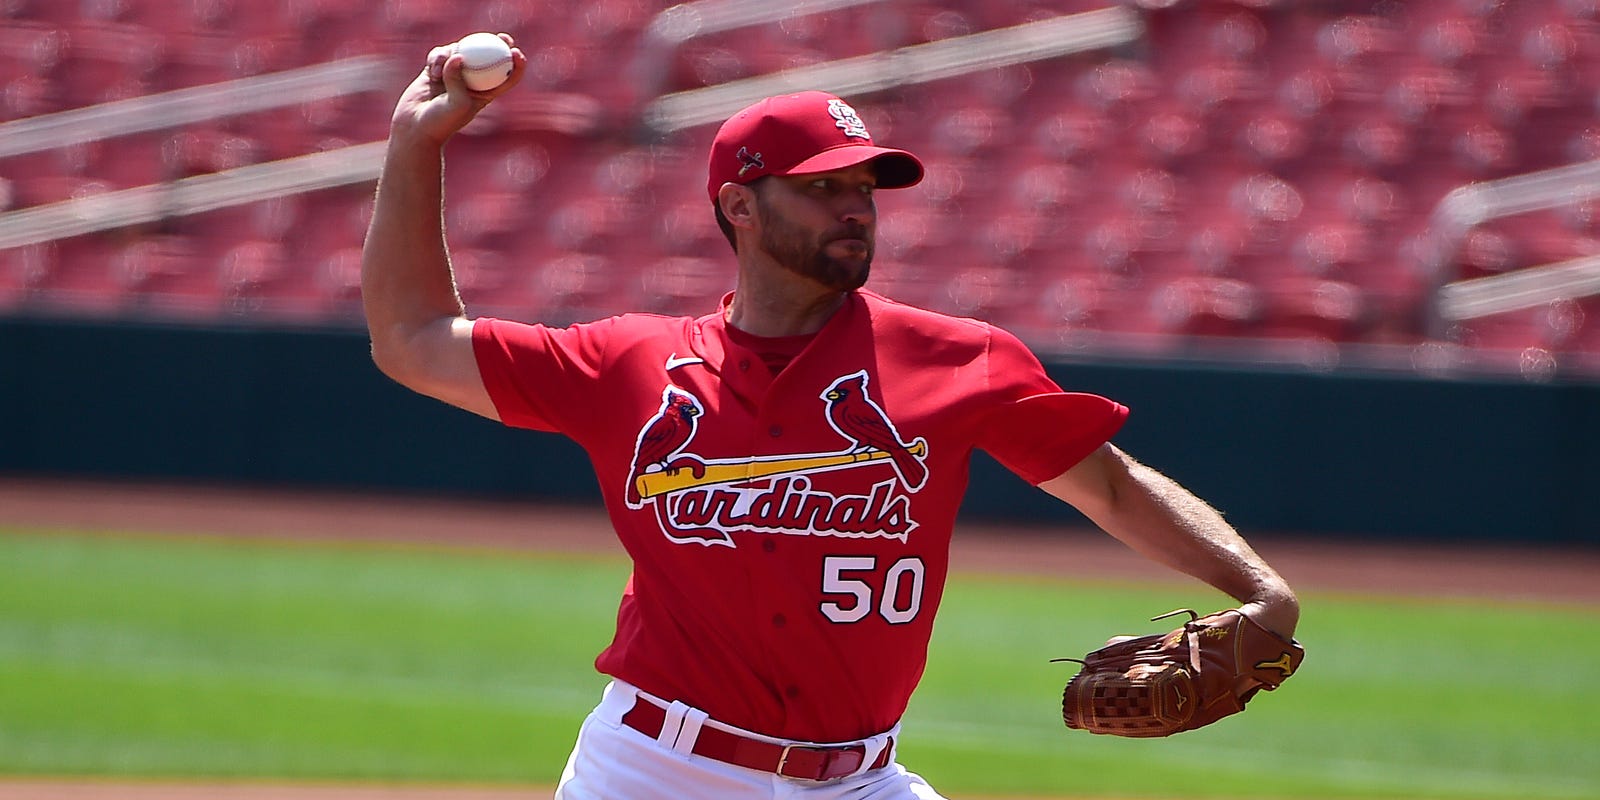 St. Louis Cardinals odds favorite to win over Pittsburgh Pirates Saturday